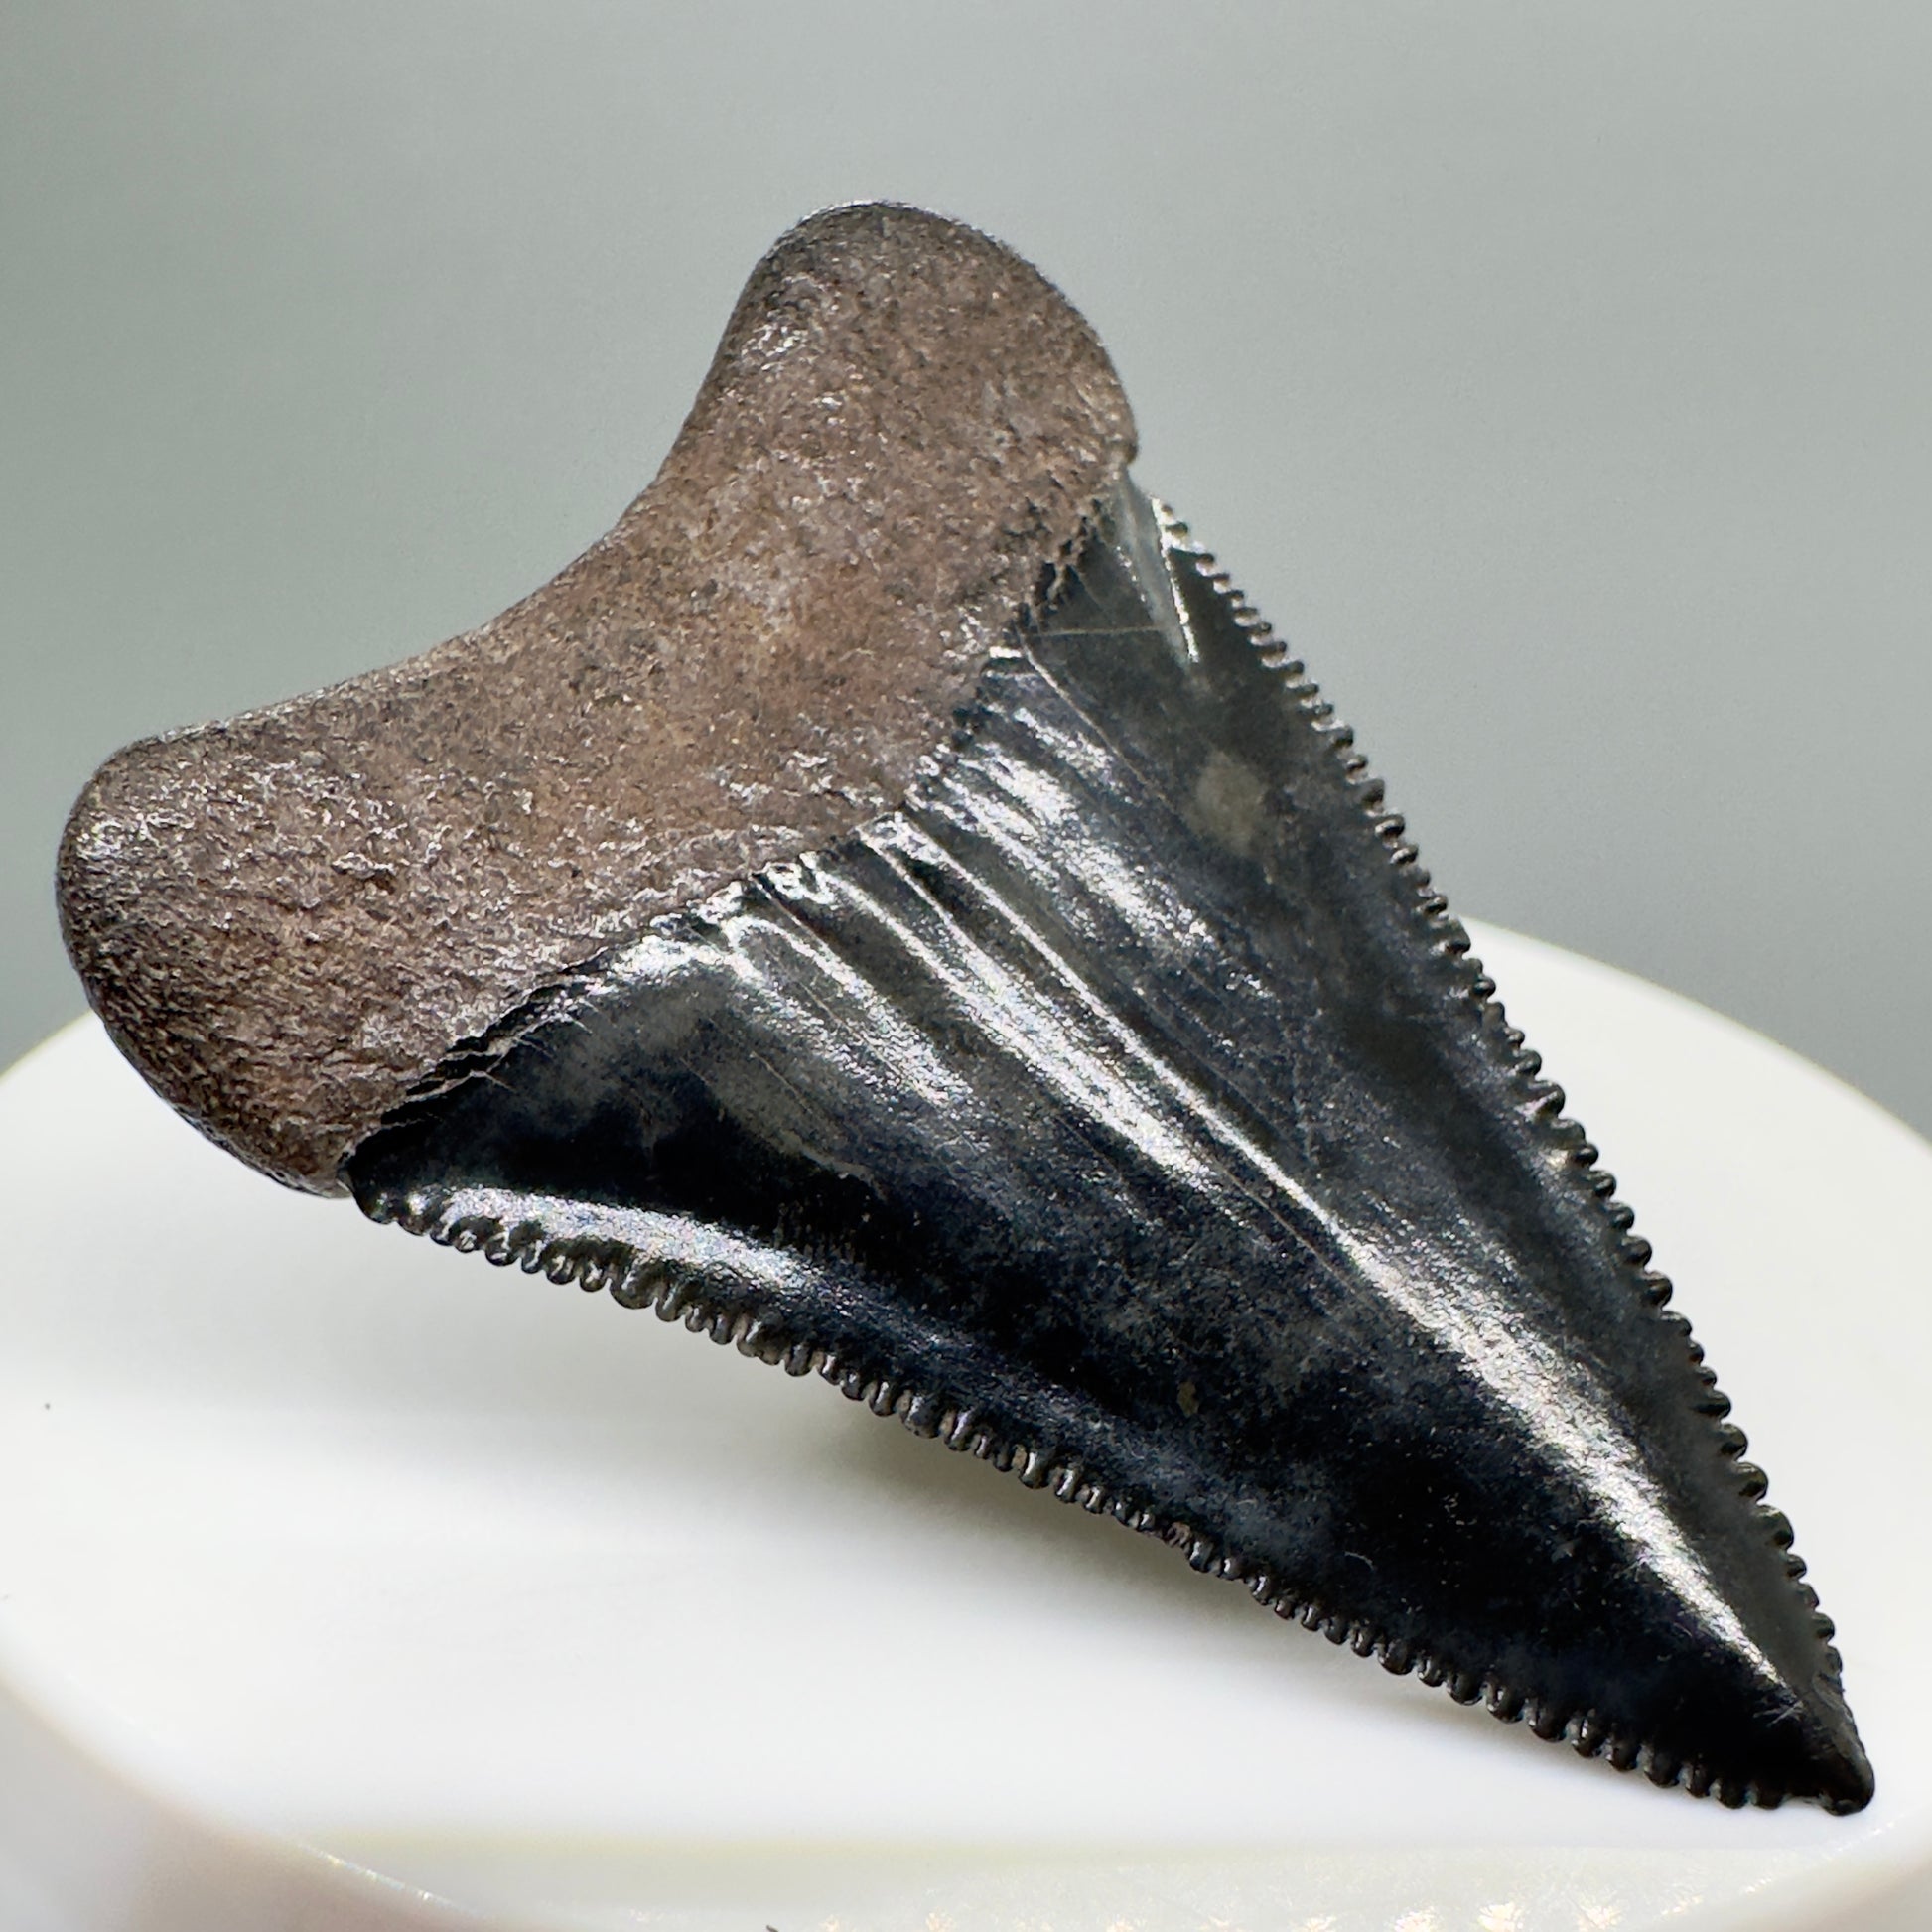 Colorful, sharply serrated 1.87" Fossil Great White Shark Tooth - South Carolina River GW1079 - Back left